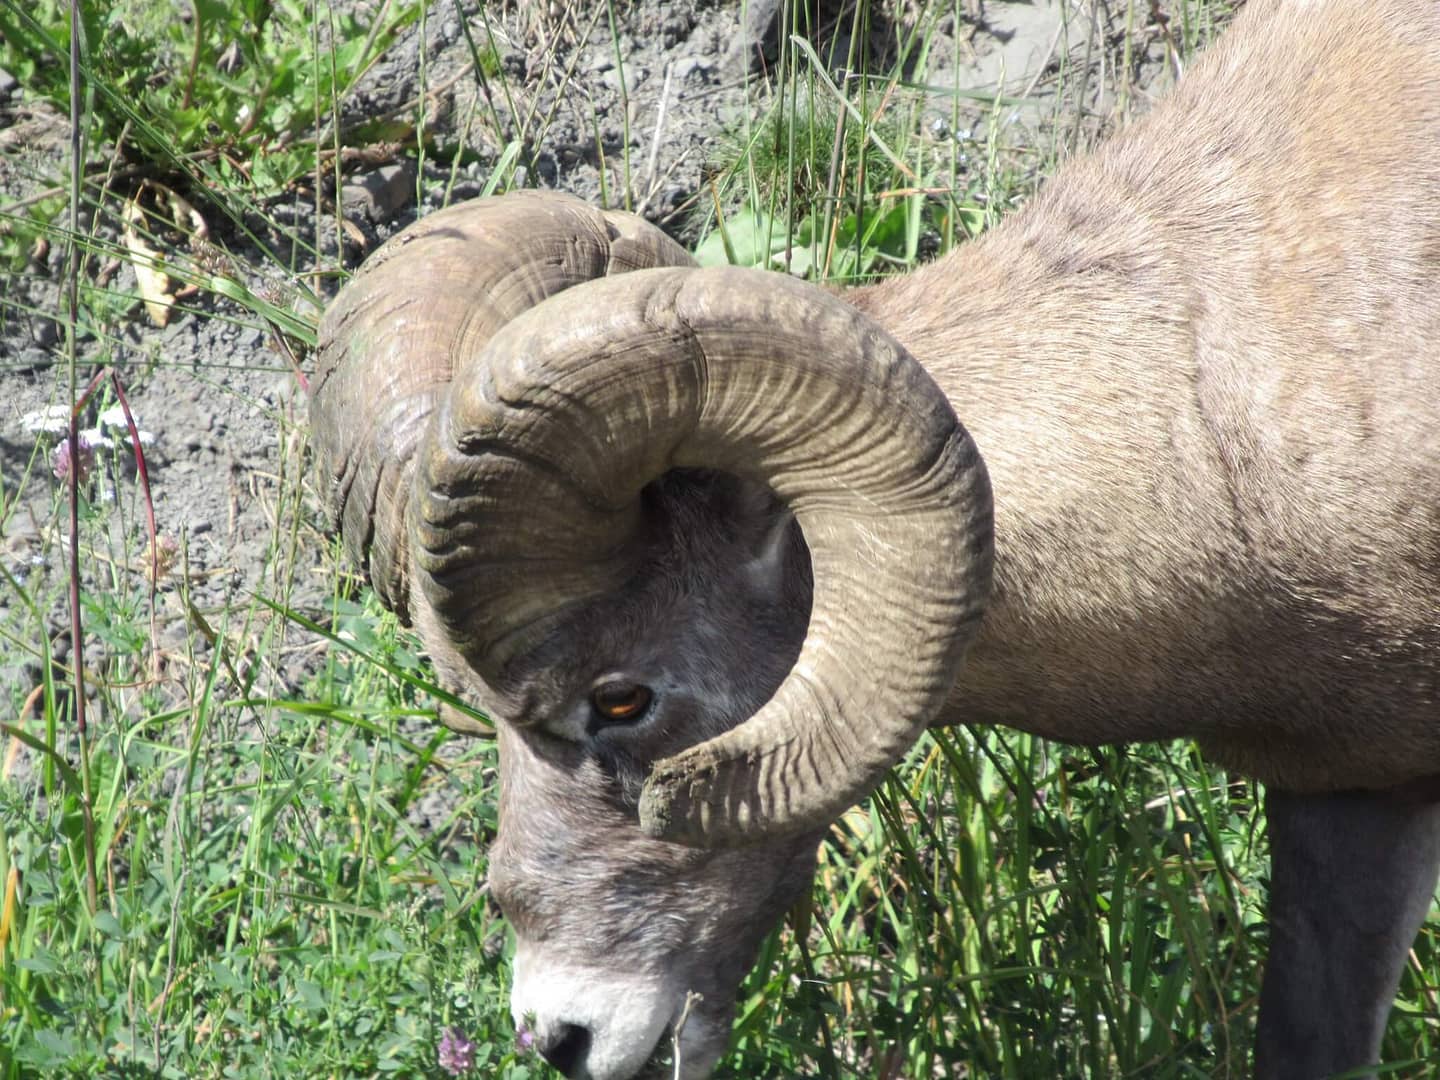 The Hinton area is home to some of the largest mountain sheep in the world.